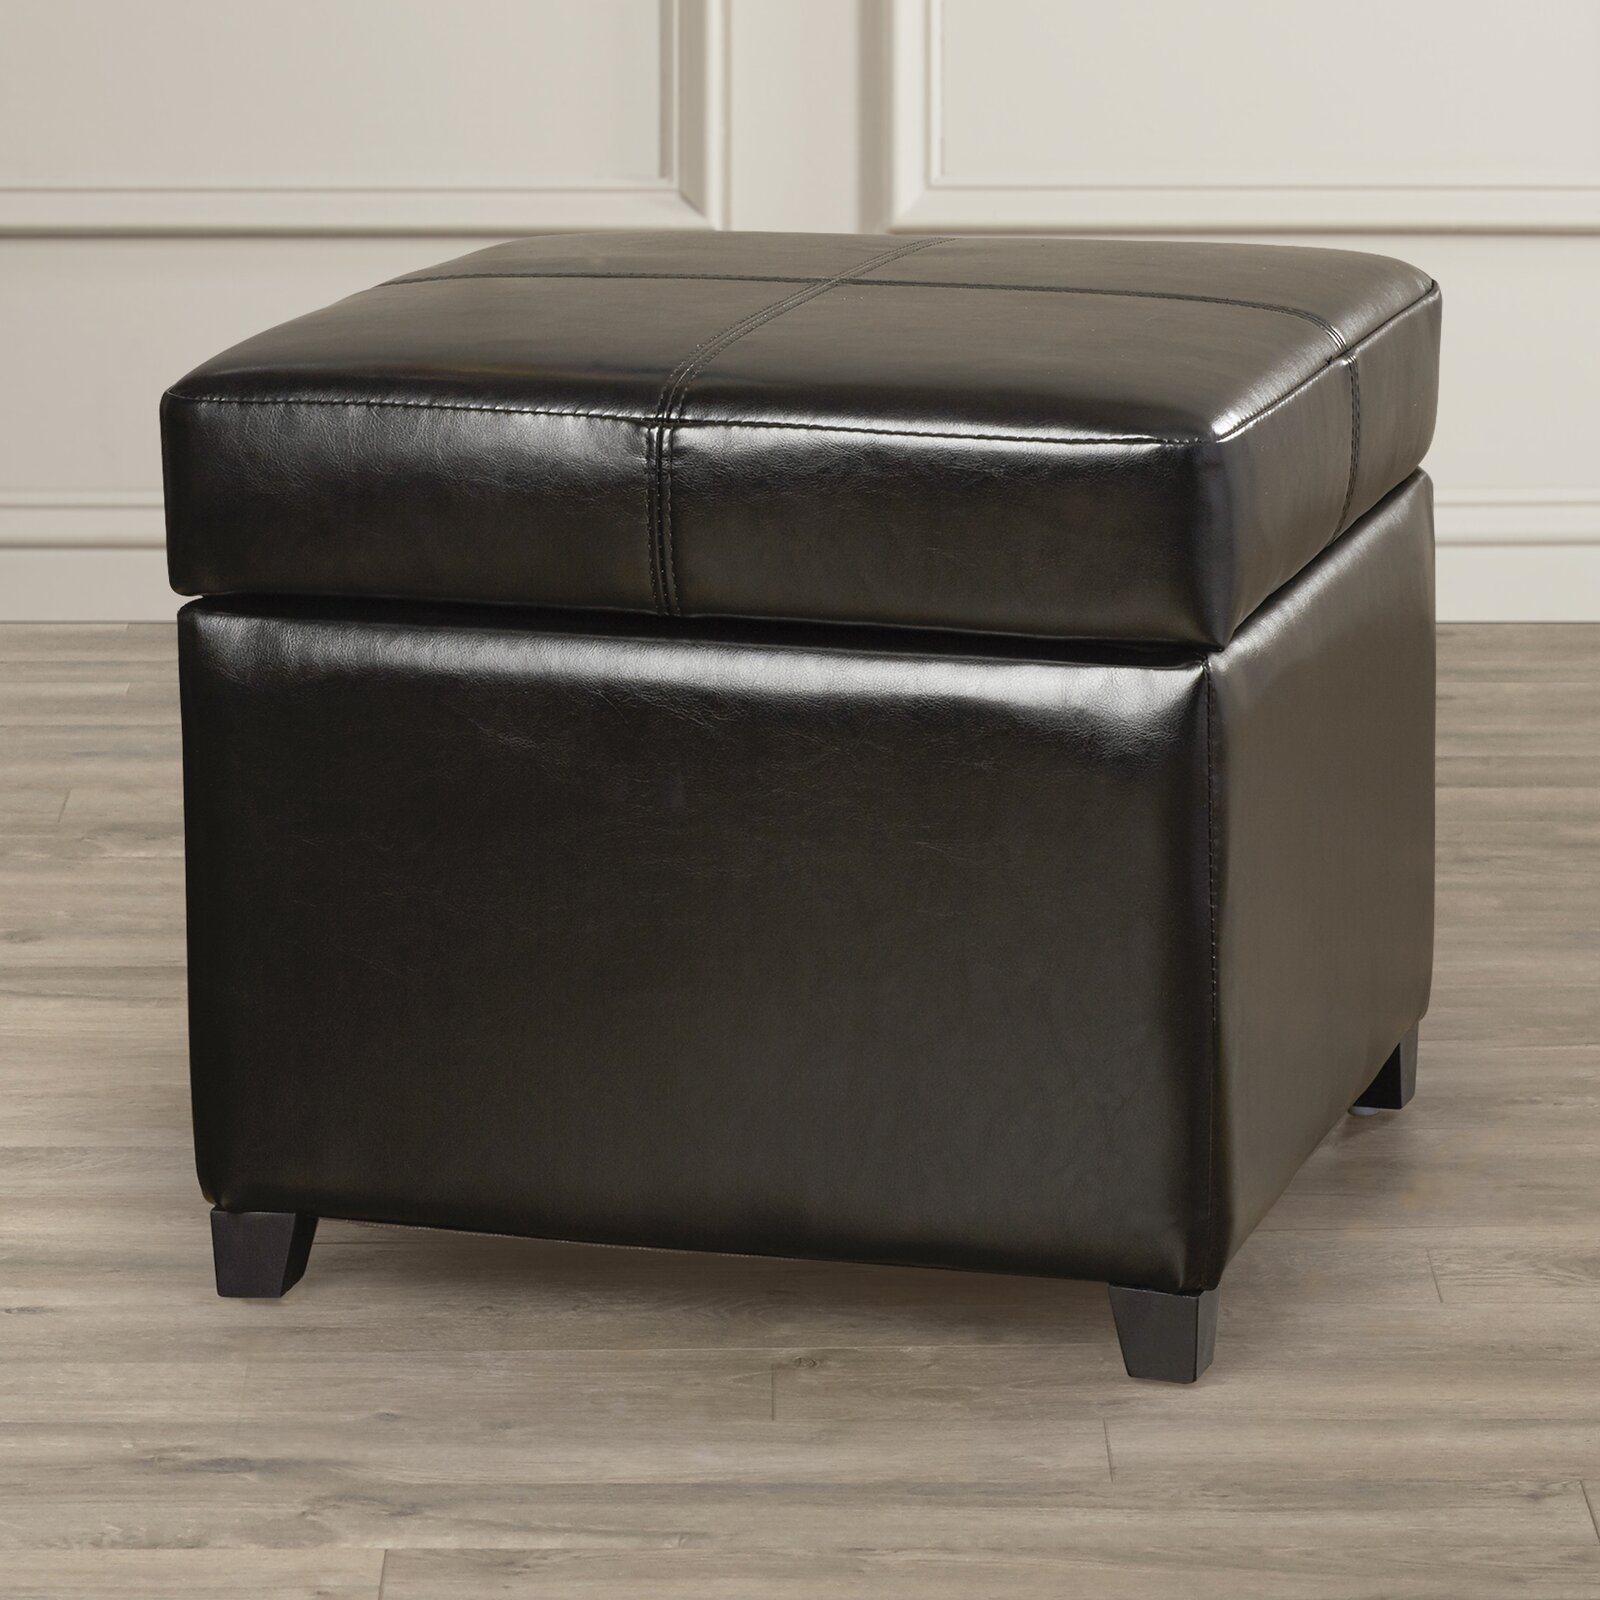 Darby Home Co Leitch Vegan Leather Storage Ottoman & Reviews